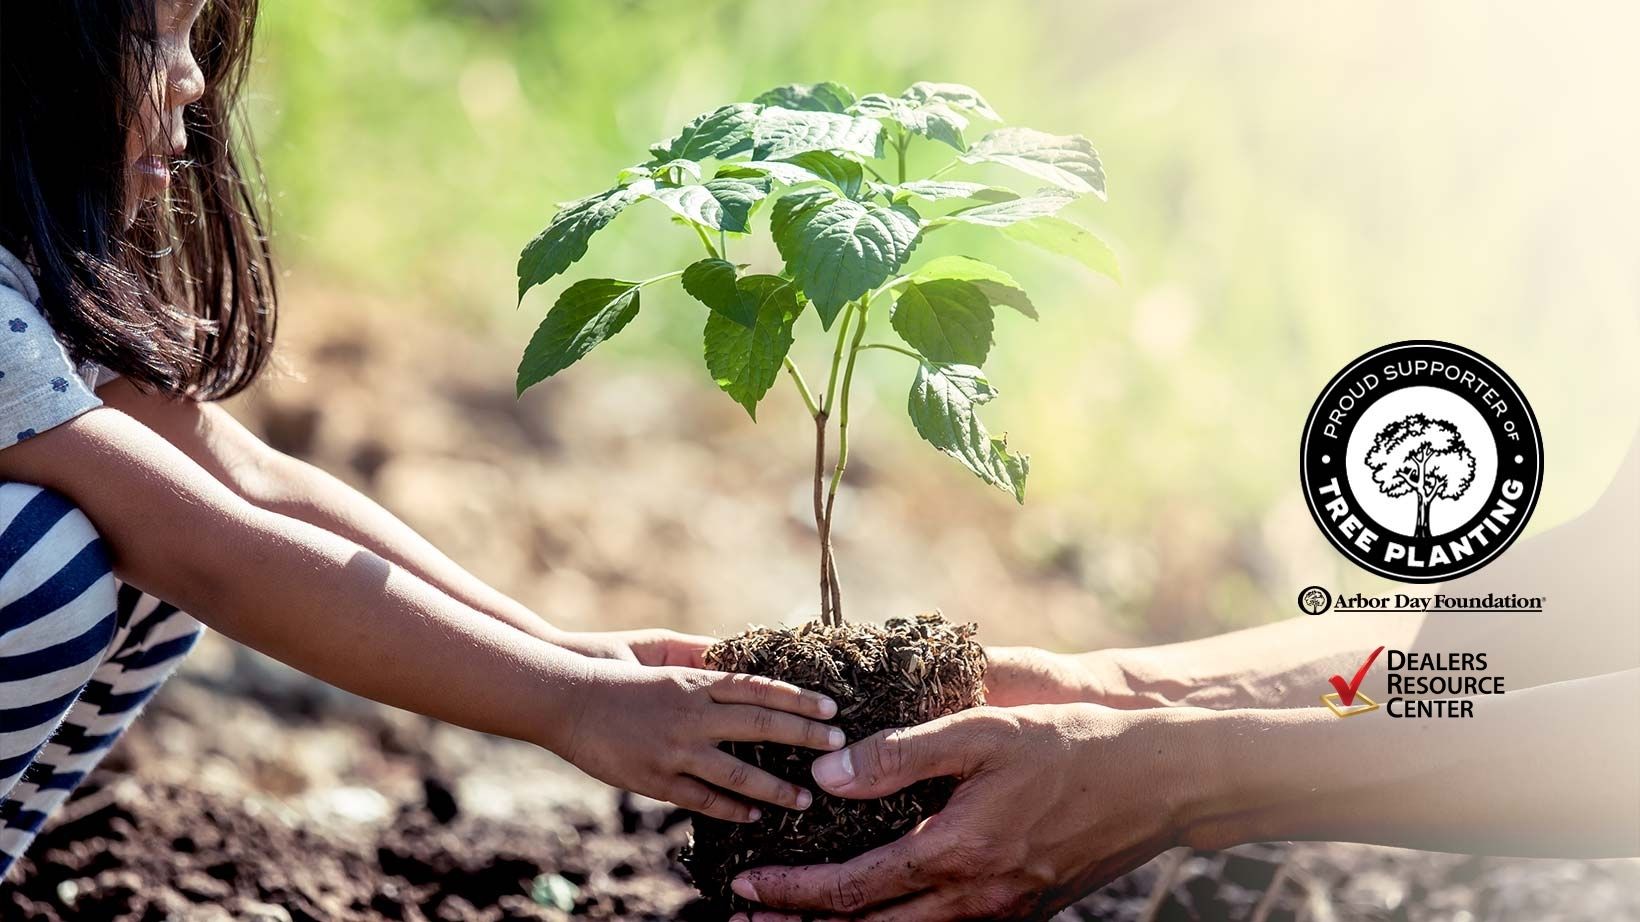 DRC Joins the Arbor Day Foundation’s Time for Trees™ Initiative 2021